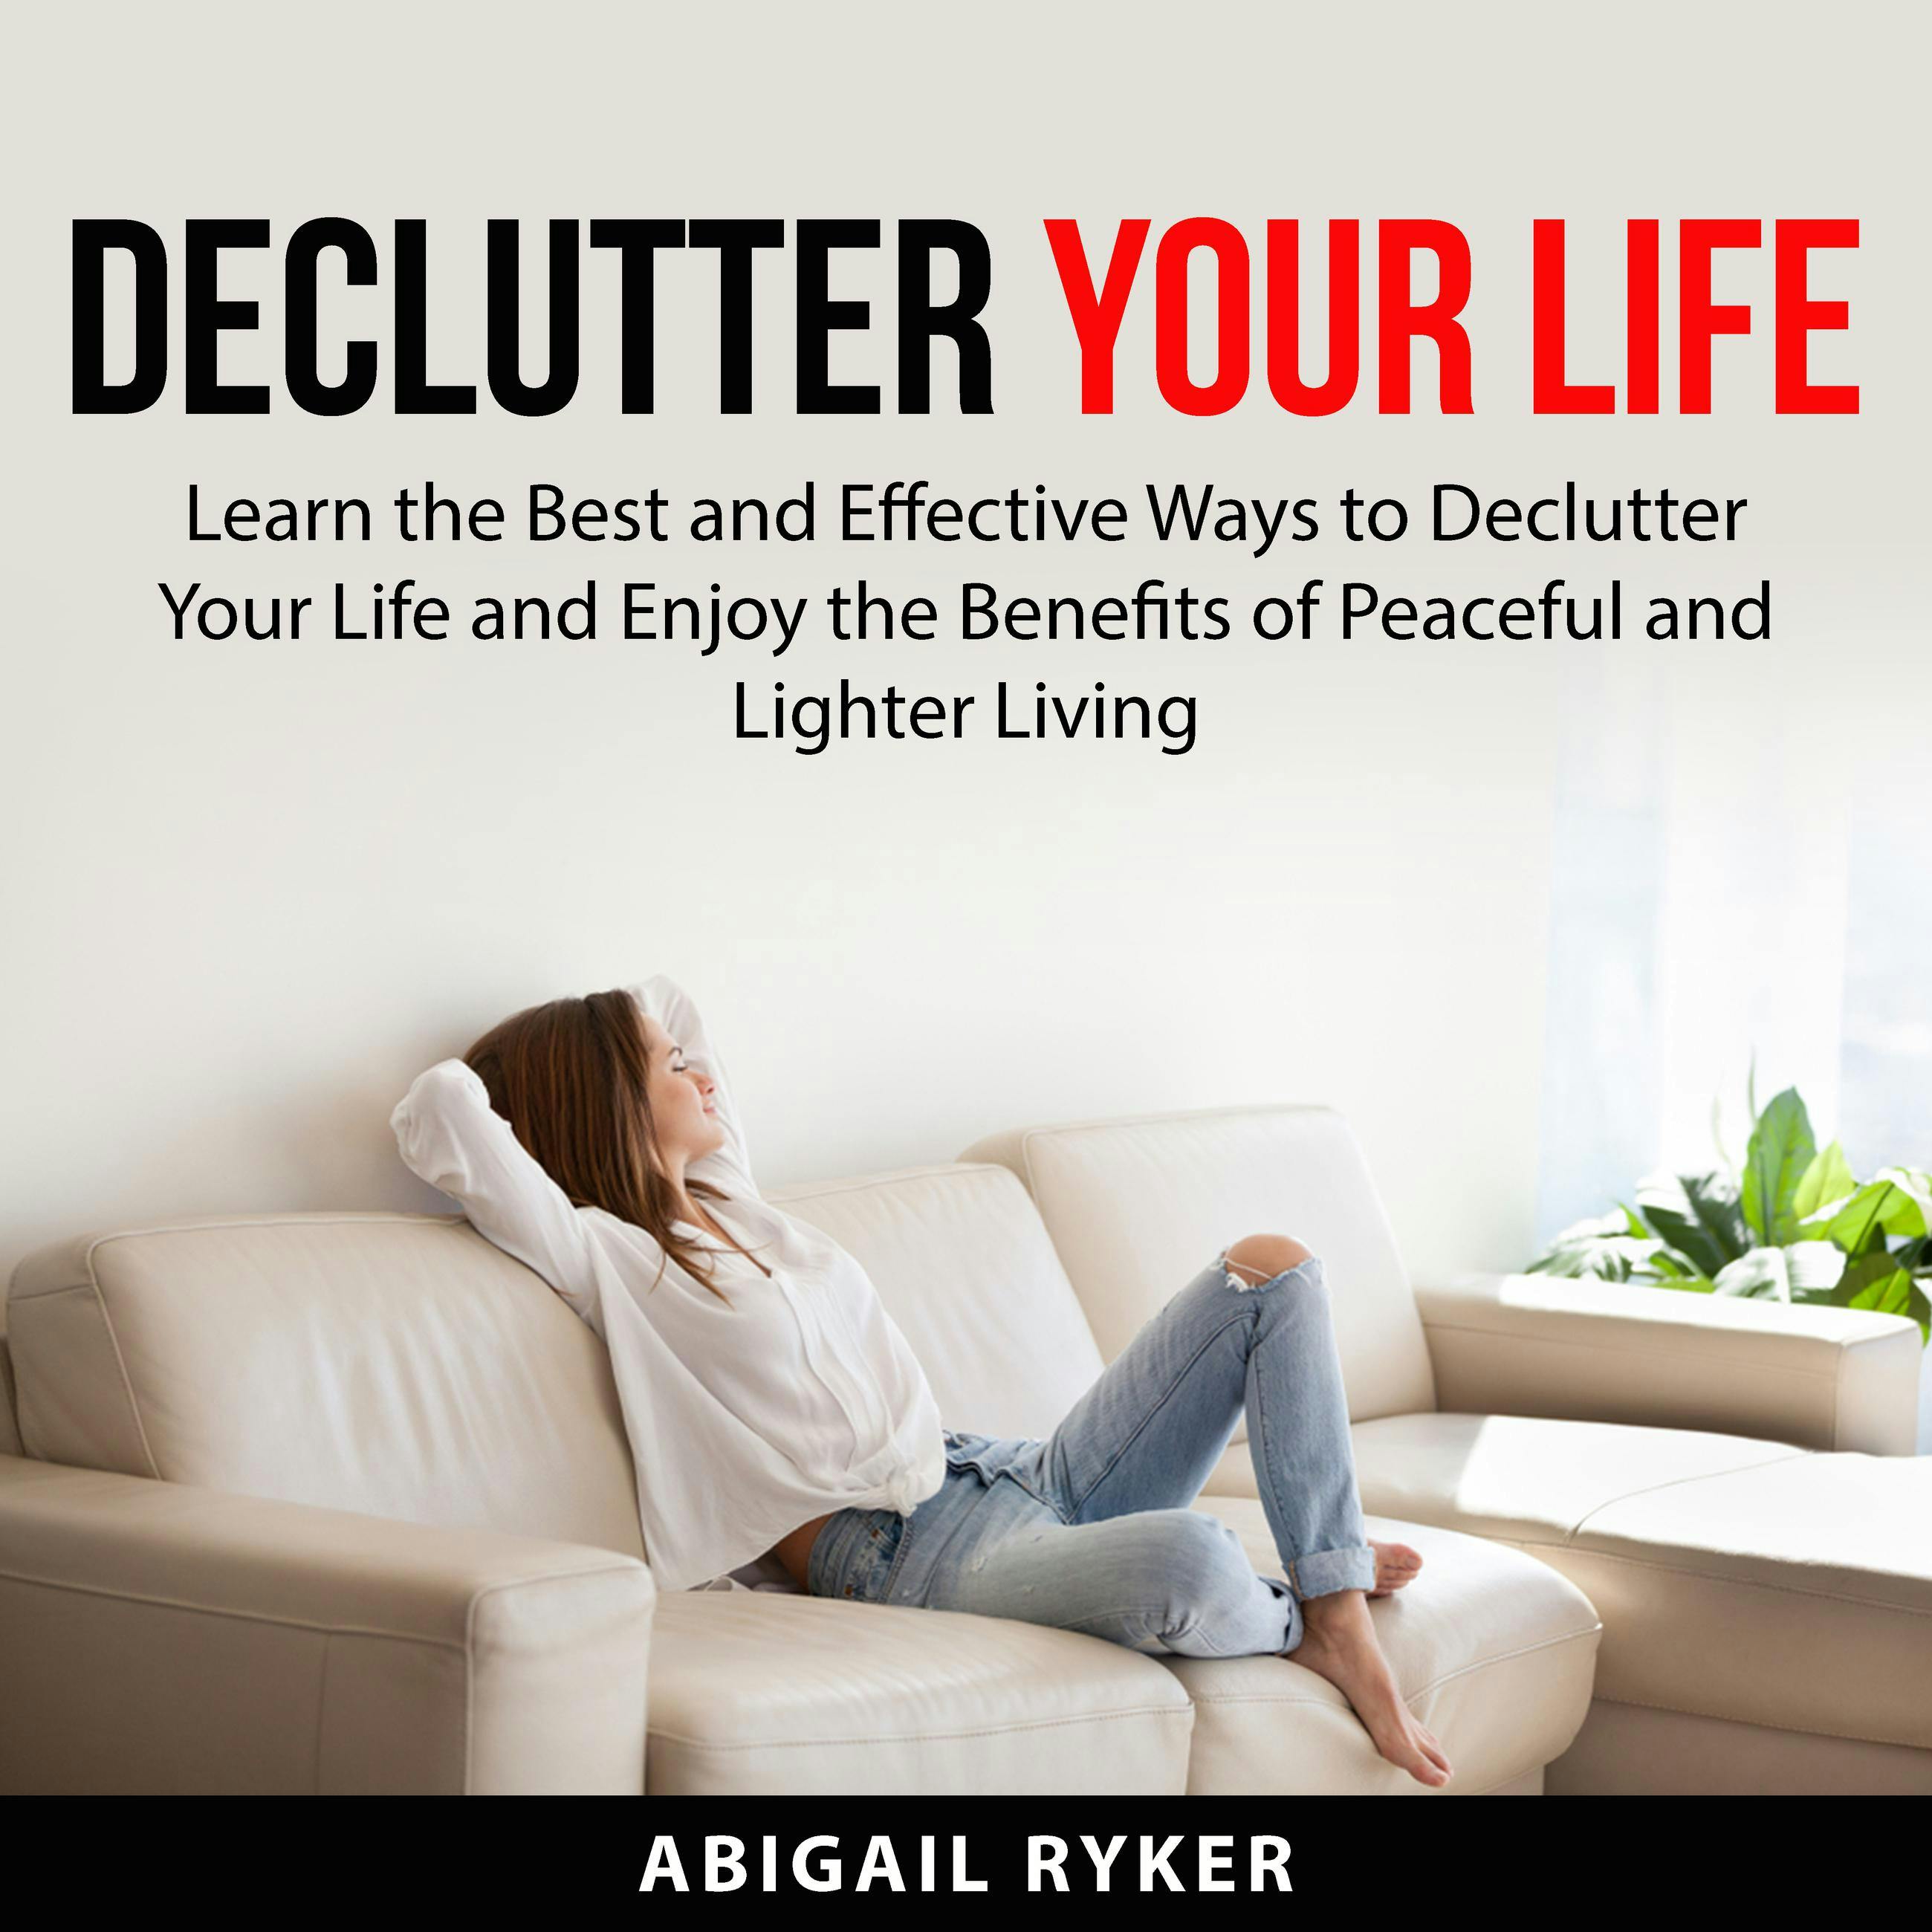 Declutter Your Life: Learn the Best and Effective Ways to Declutter Your Life and Enjoy the Benefits of Peaceful and Lighter Living - undefined